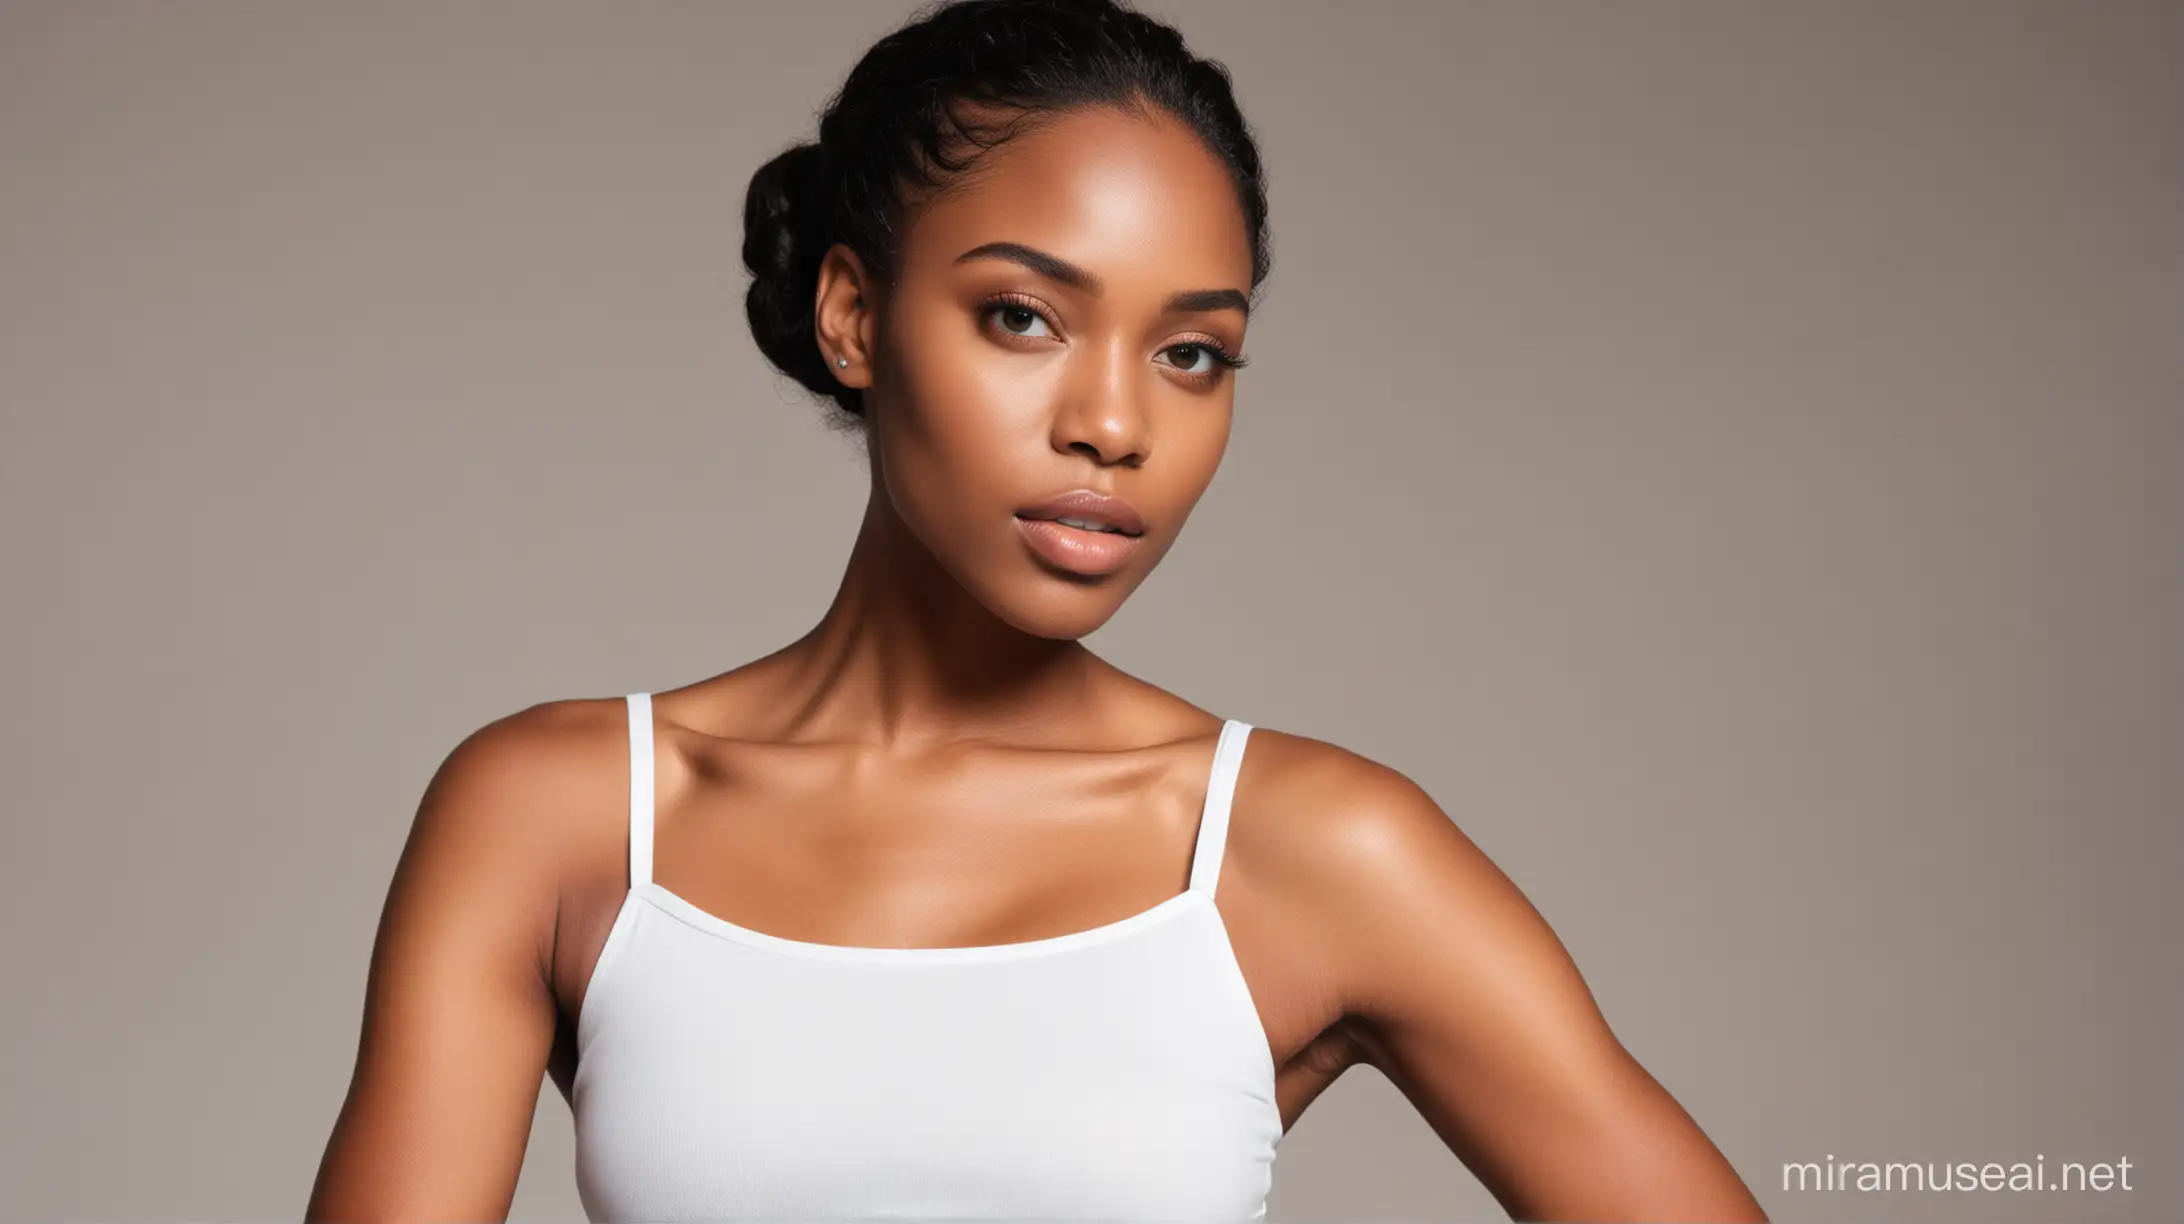 Stylish Black Woman Model in White Crop Top Poses Directly to Camera